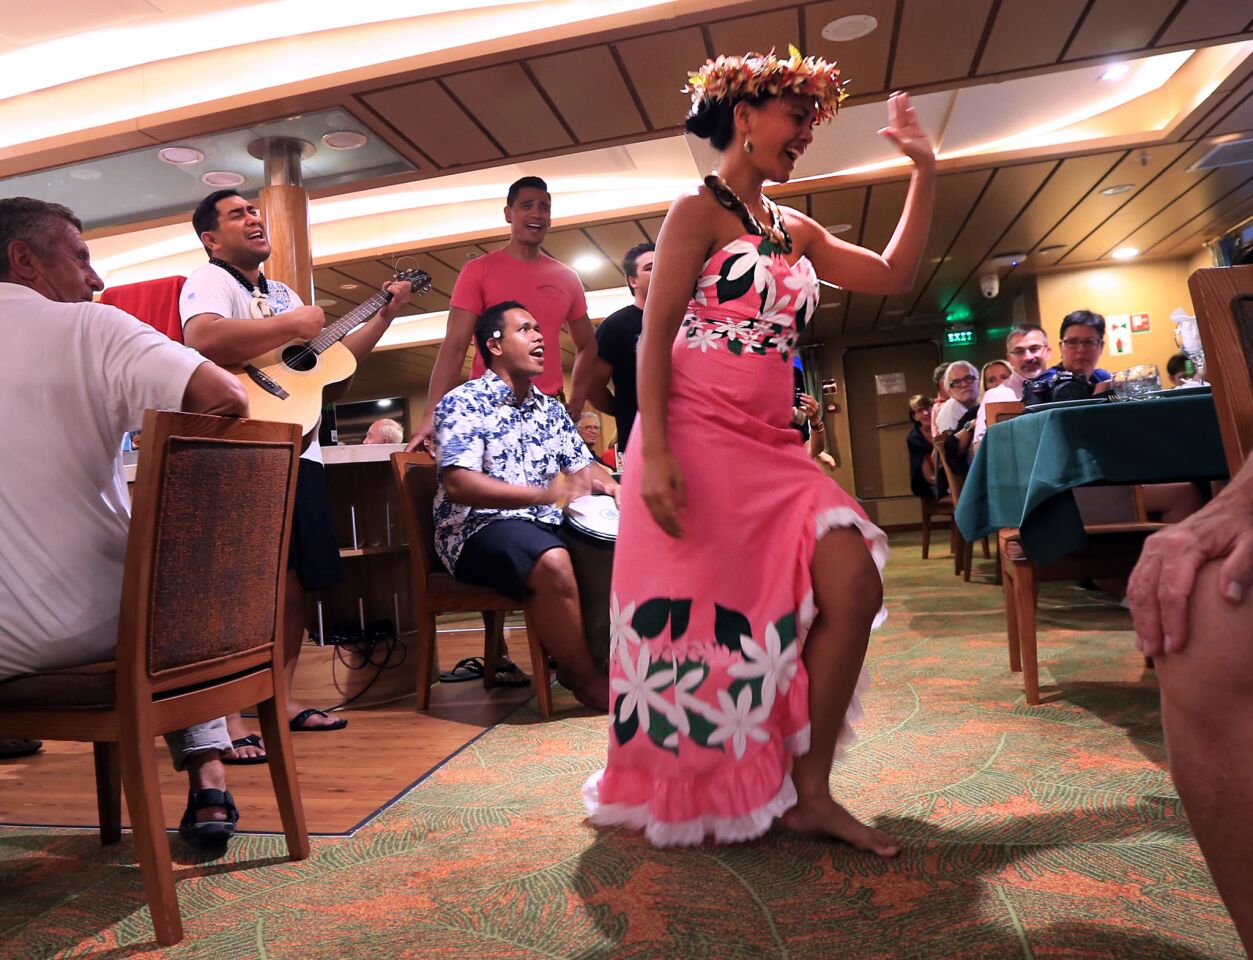 Often meal time would include entertainment from the ships crew aboard the Aranui 5 ship.